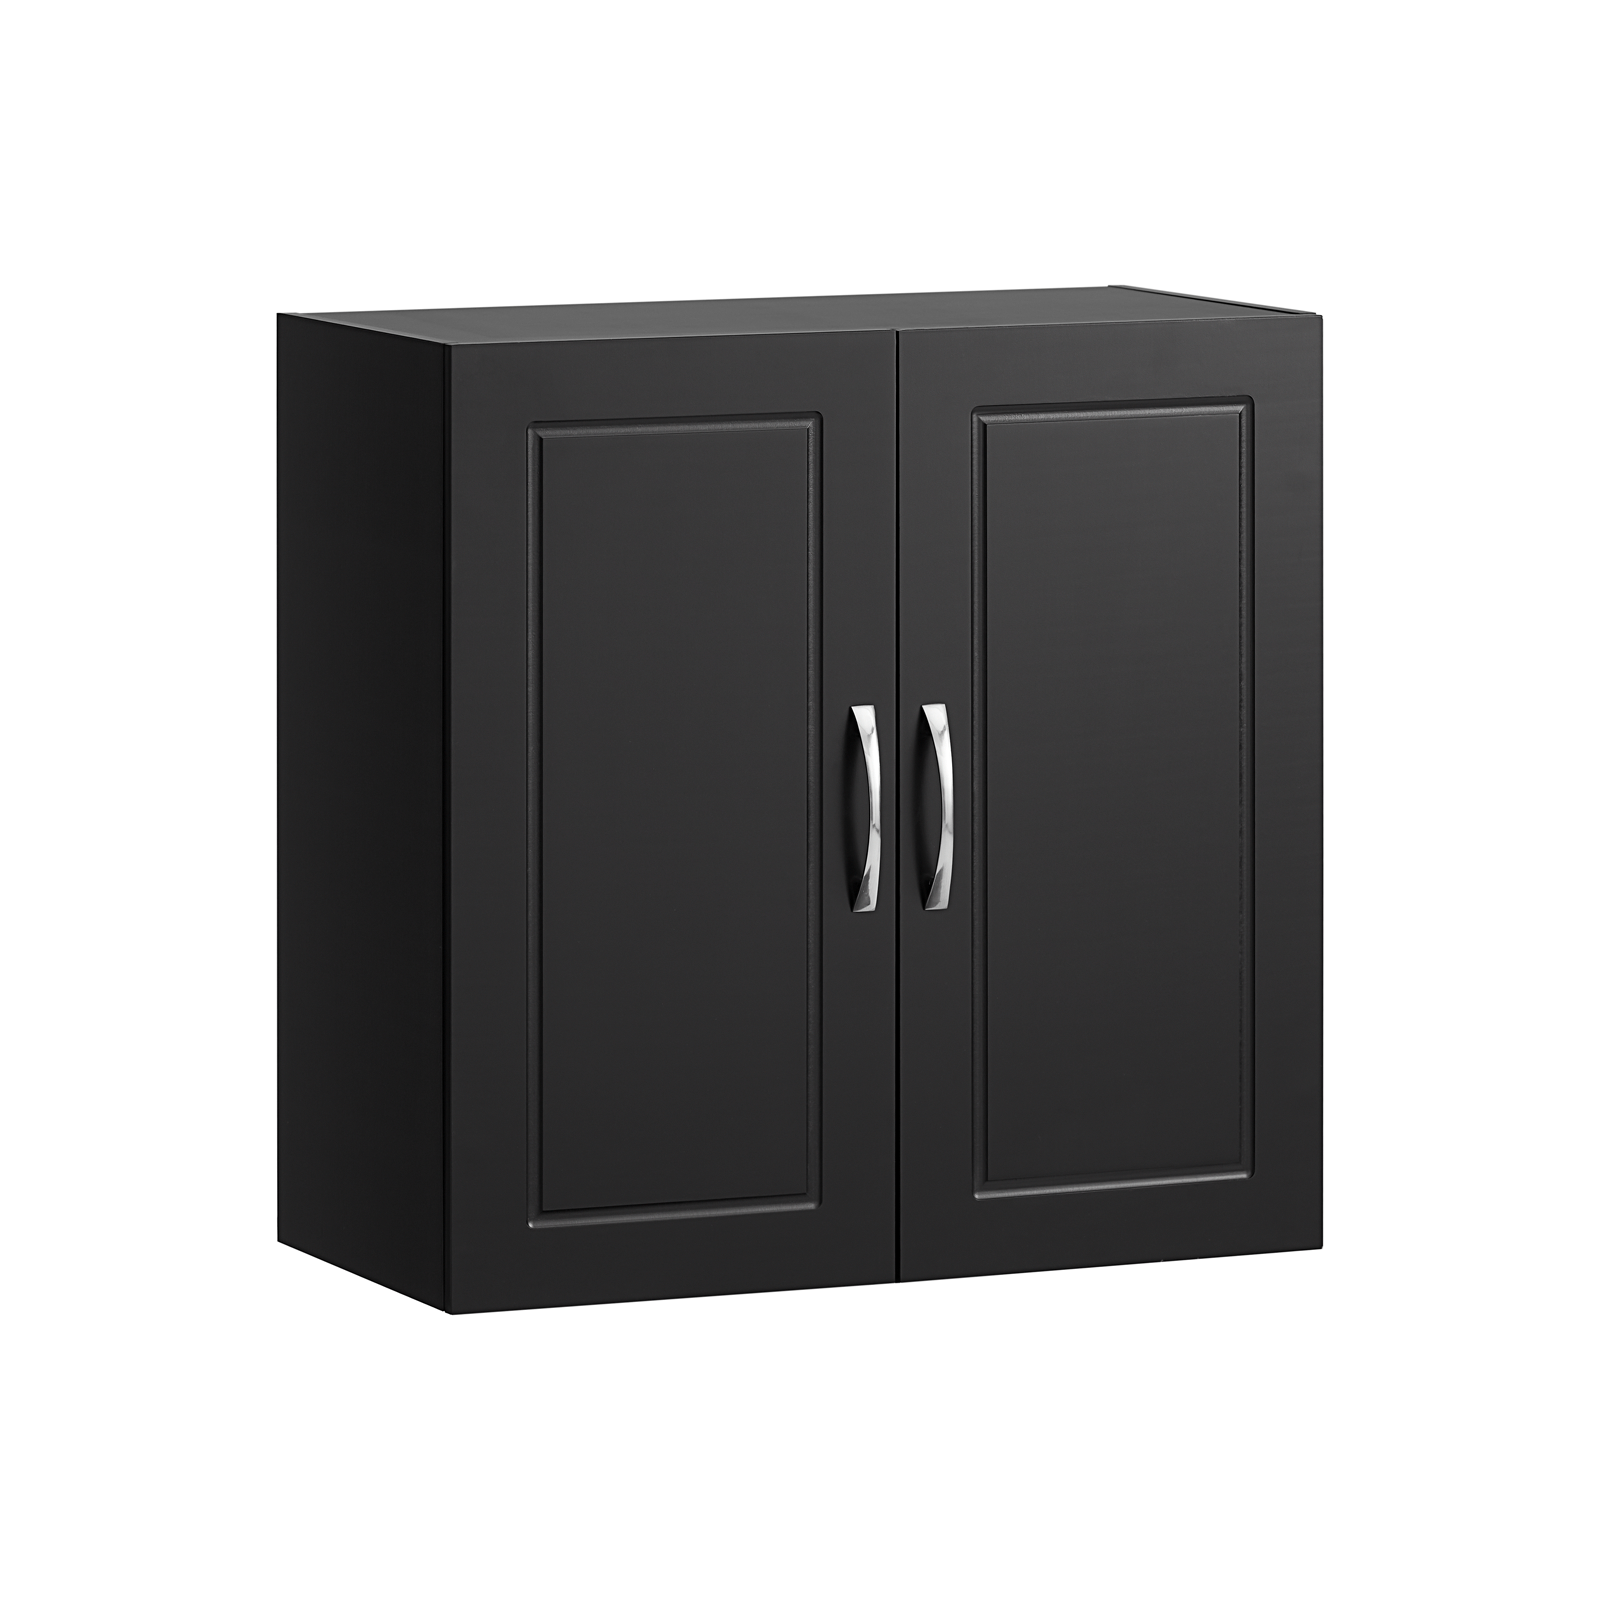 SoBuy FRG231-SCH,Wall Storage Cabinet Unit with Double Doors,Kitchen Bathroom Wall Cabinet,Garage or Laundry Room Black